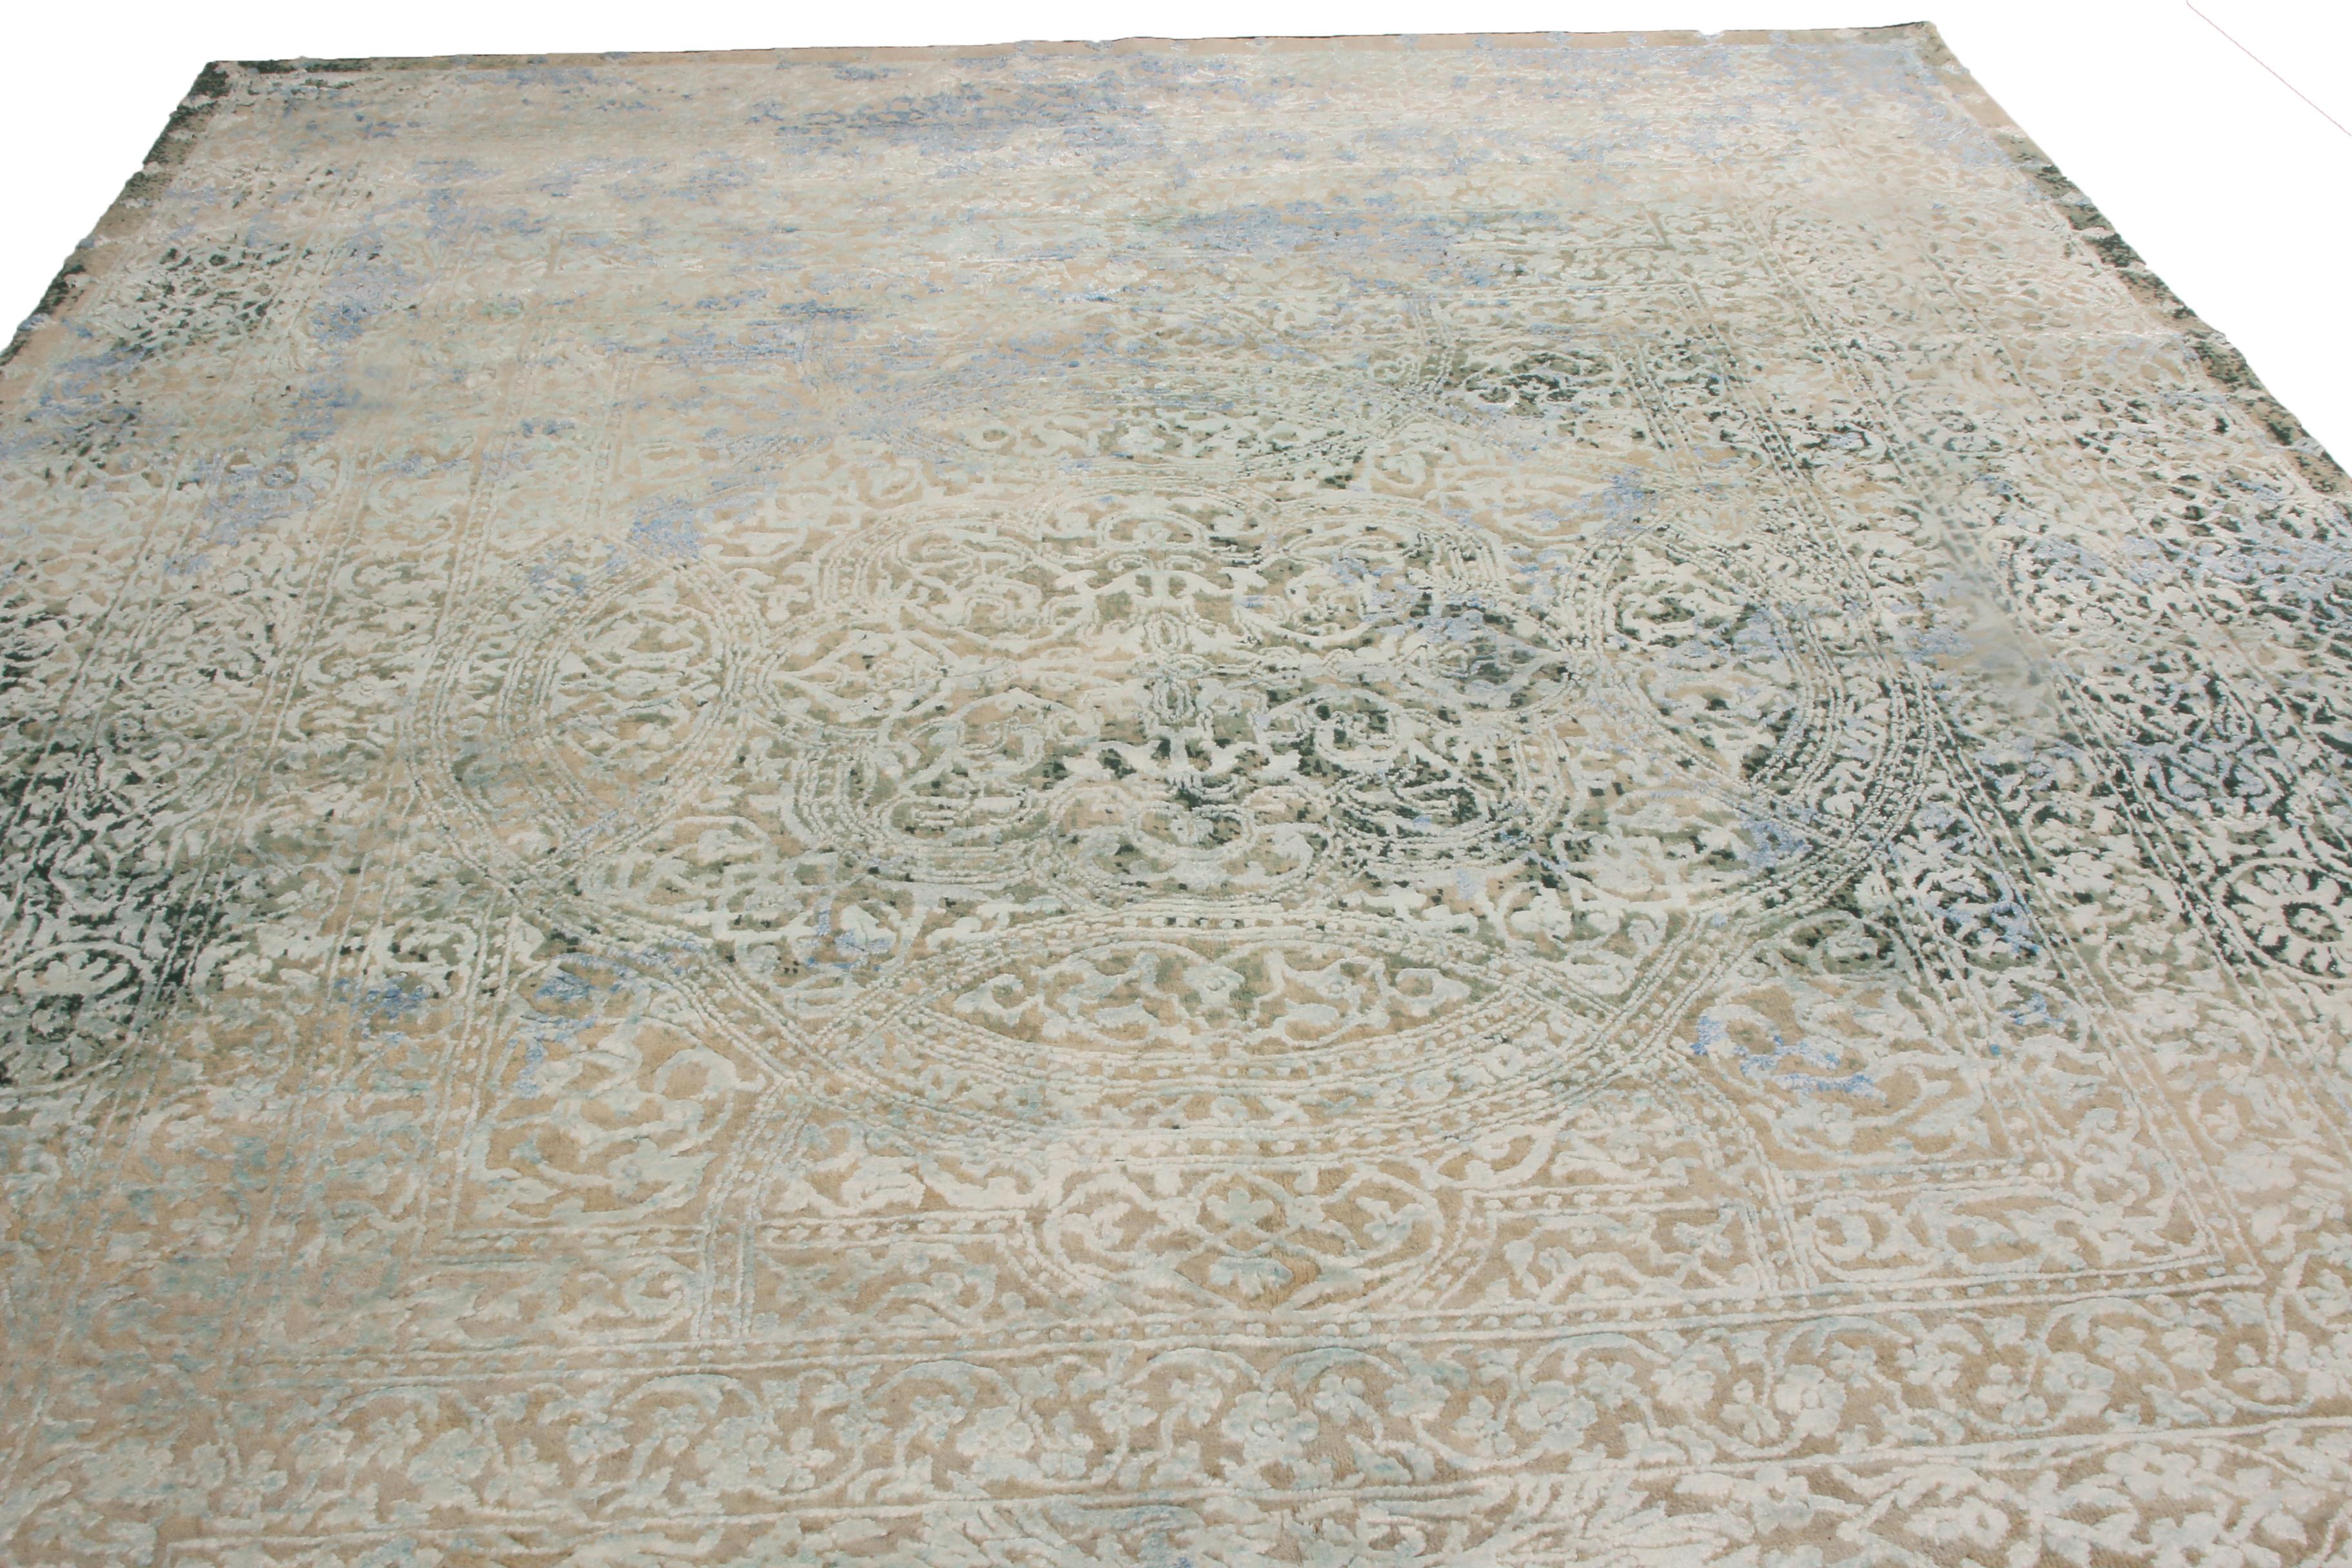 Originating from India, this Agra geometric-floral rug is hand knotted in high-quality wool and silk with distinguished colorways and a unique combination of patterns. Featuring an all-over field design marrying Frost blue and a distinct green-gray